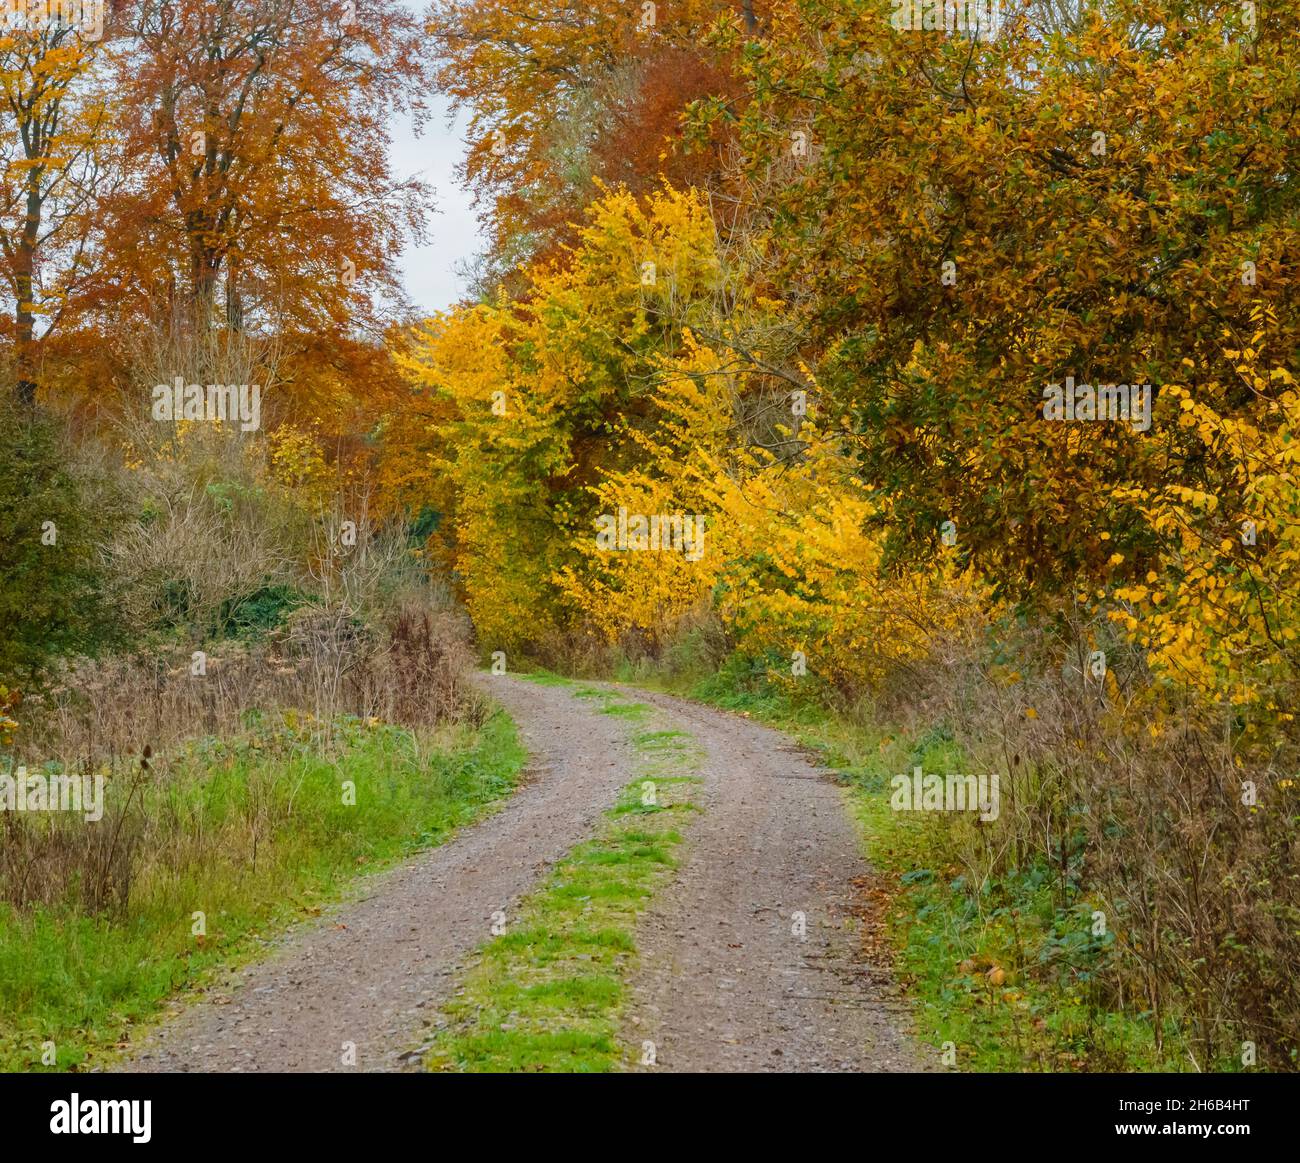 an autumnal track glowing with gold, yellow and copper leaves Stock Photo